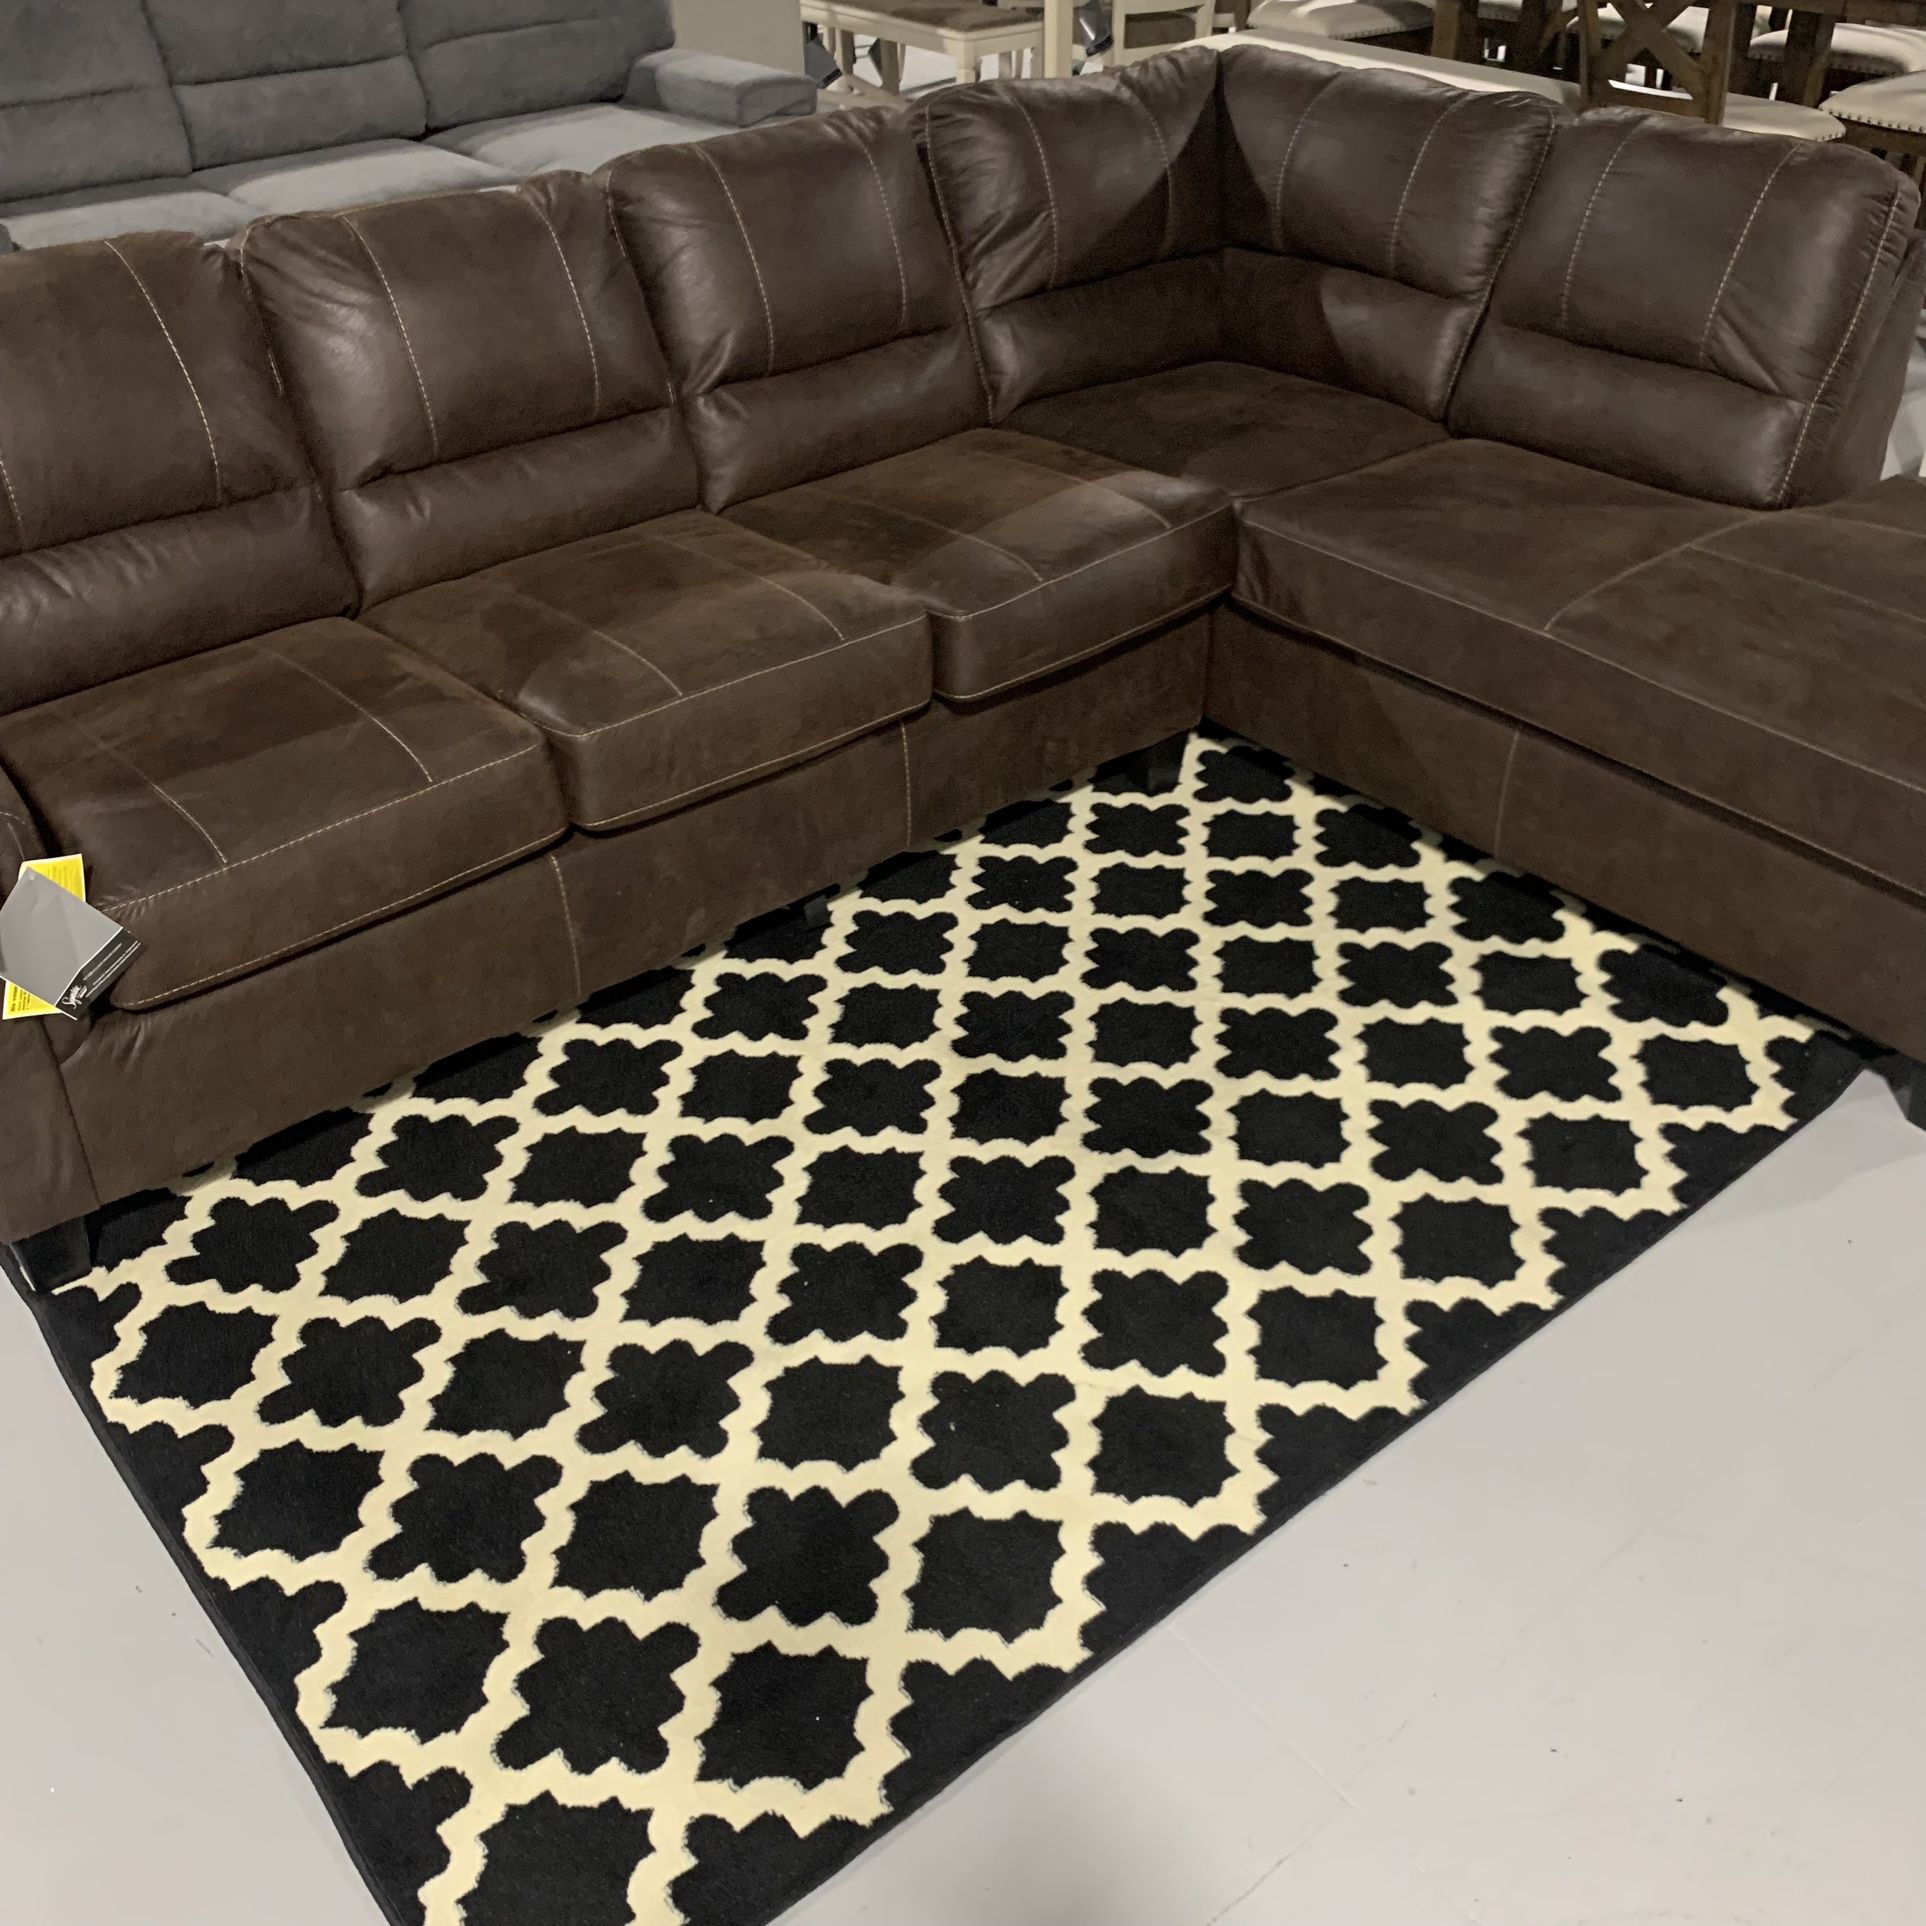 NAVI SECTIONAL/ DIFFERENT SHAPES AND COLORS ARA AVALIABLE/ SLEEPER AVALIABLE